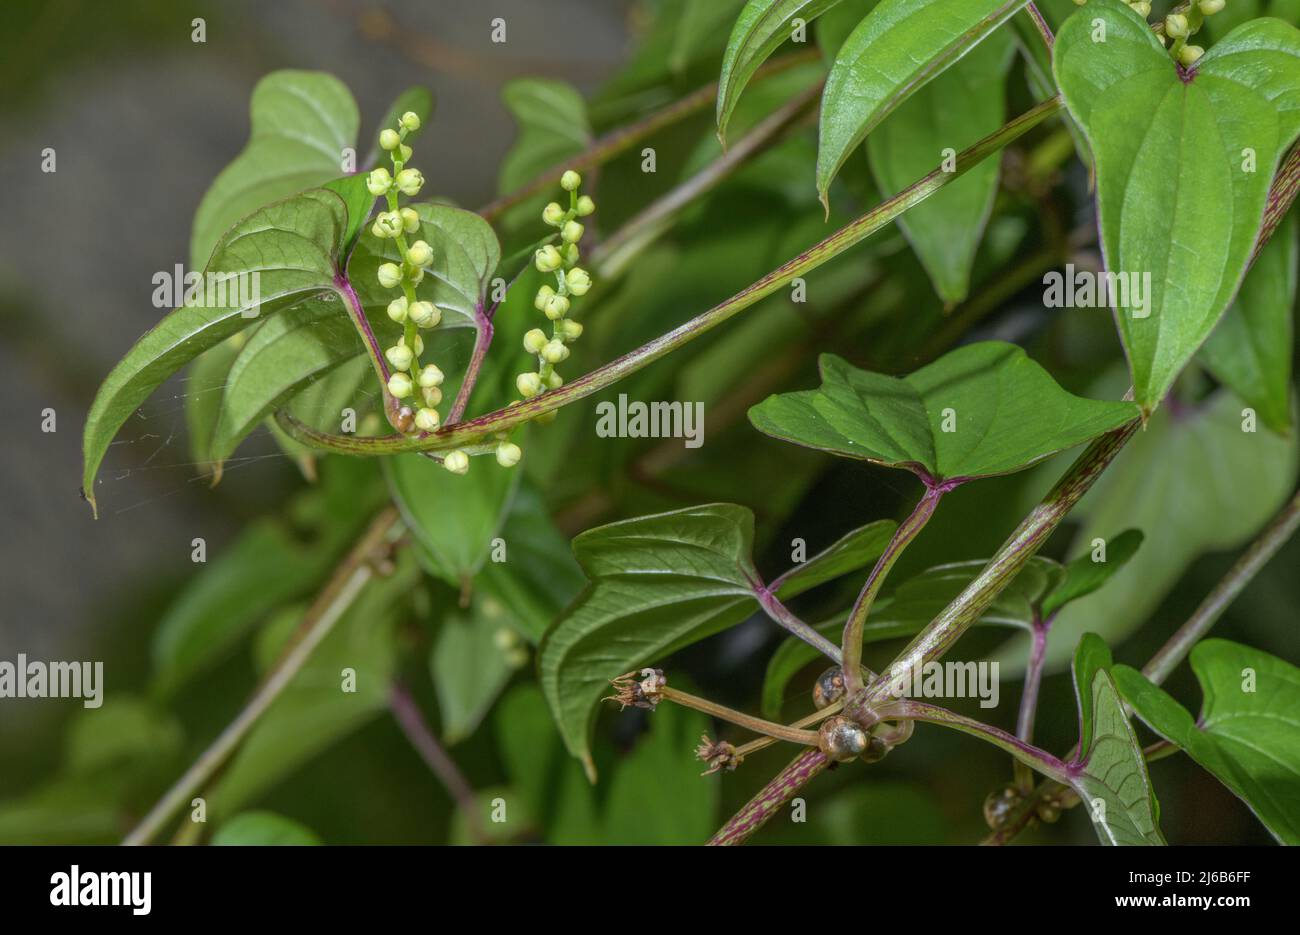 Chinese yam, Dioscorea batatas, in flower in cultivation. Stock Photo